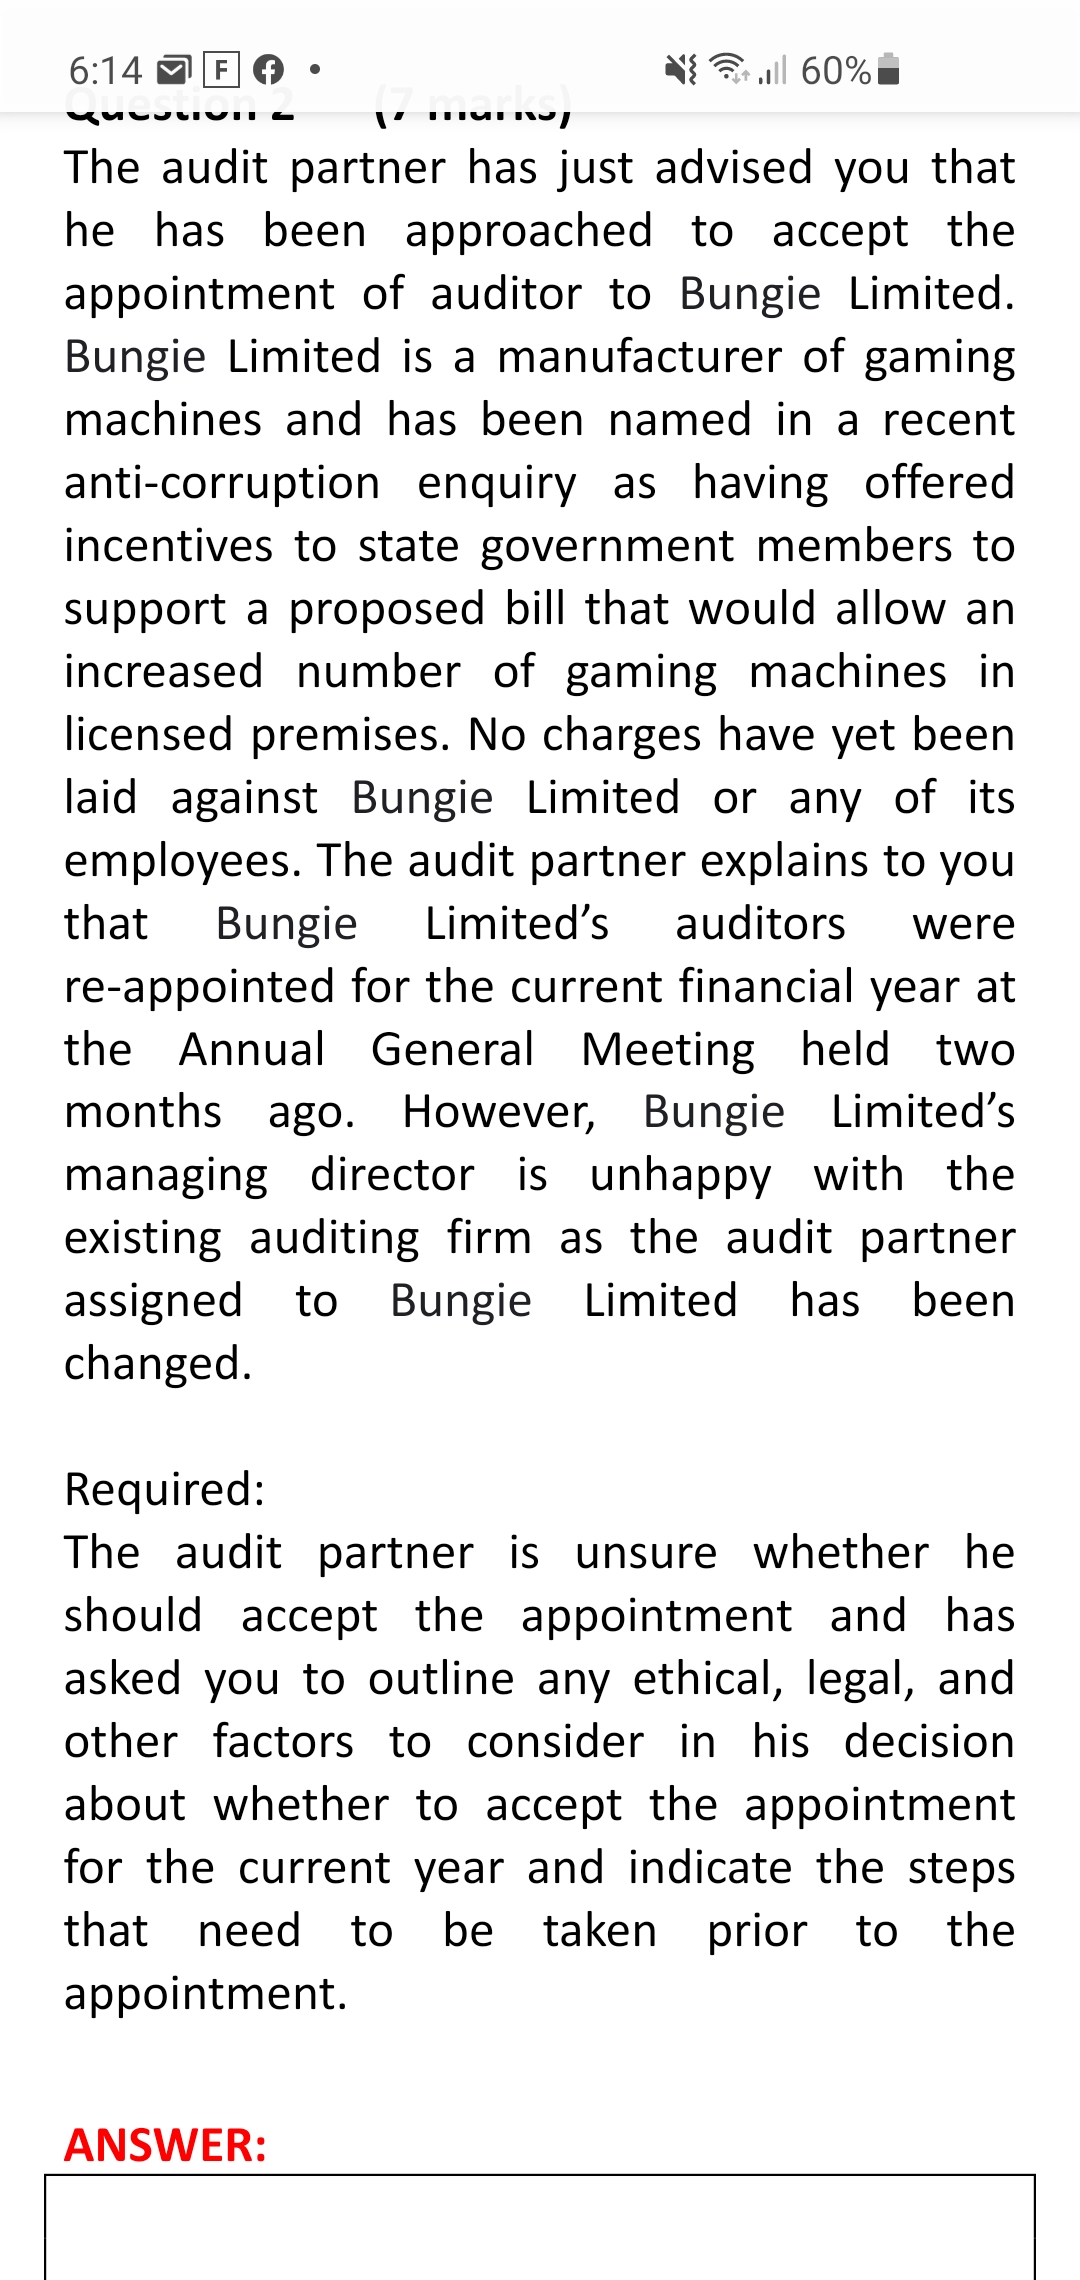 6:14 M F
3 all 60%
The audit partner has just advised you that
he has been approached to accept the
appointment of auditor to Bungie Limited.
Bungie Limited is a manufacturer of gaming
machines and has been named in a recent
anti-corruption enquiry as having offered
incentives to state government members to
support a proposed bill that would allow an
increased number of gaming machines in
licensed premises. No charges have yet been
laid against Bungie Limited or any of its
employees. The audit partner explains to you
that
Bungie
Limited's
auditors
were
re-appointed for the current financial year at
the Annual General Meeting held two
months ago. However, Bungie Limited's
managing director is unhappy with the
existing auditing firm as the audit partner
assigned to Bungie Limited has
changed.
been
Required:
The audit partner is unsure whether he
should accept the appointment and has
asked you to outline any ethical, legal, and
other factors to consider in his decision
about whether to accept the appointment
for the current year and indicate the steps
that need to be taken prior to the
appointment.
ANSWER:
